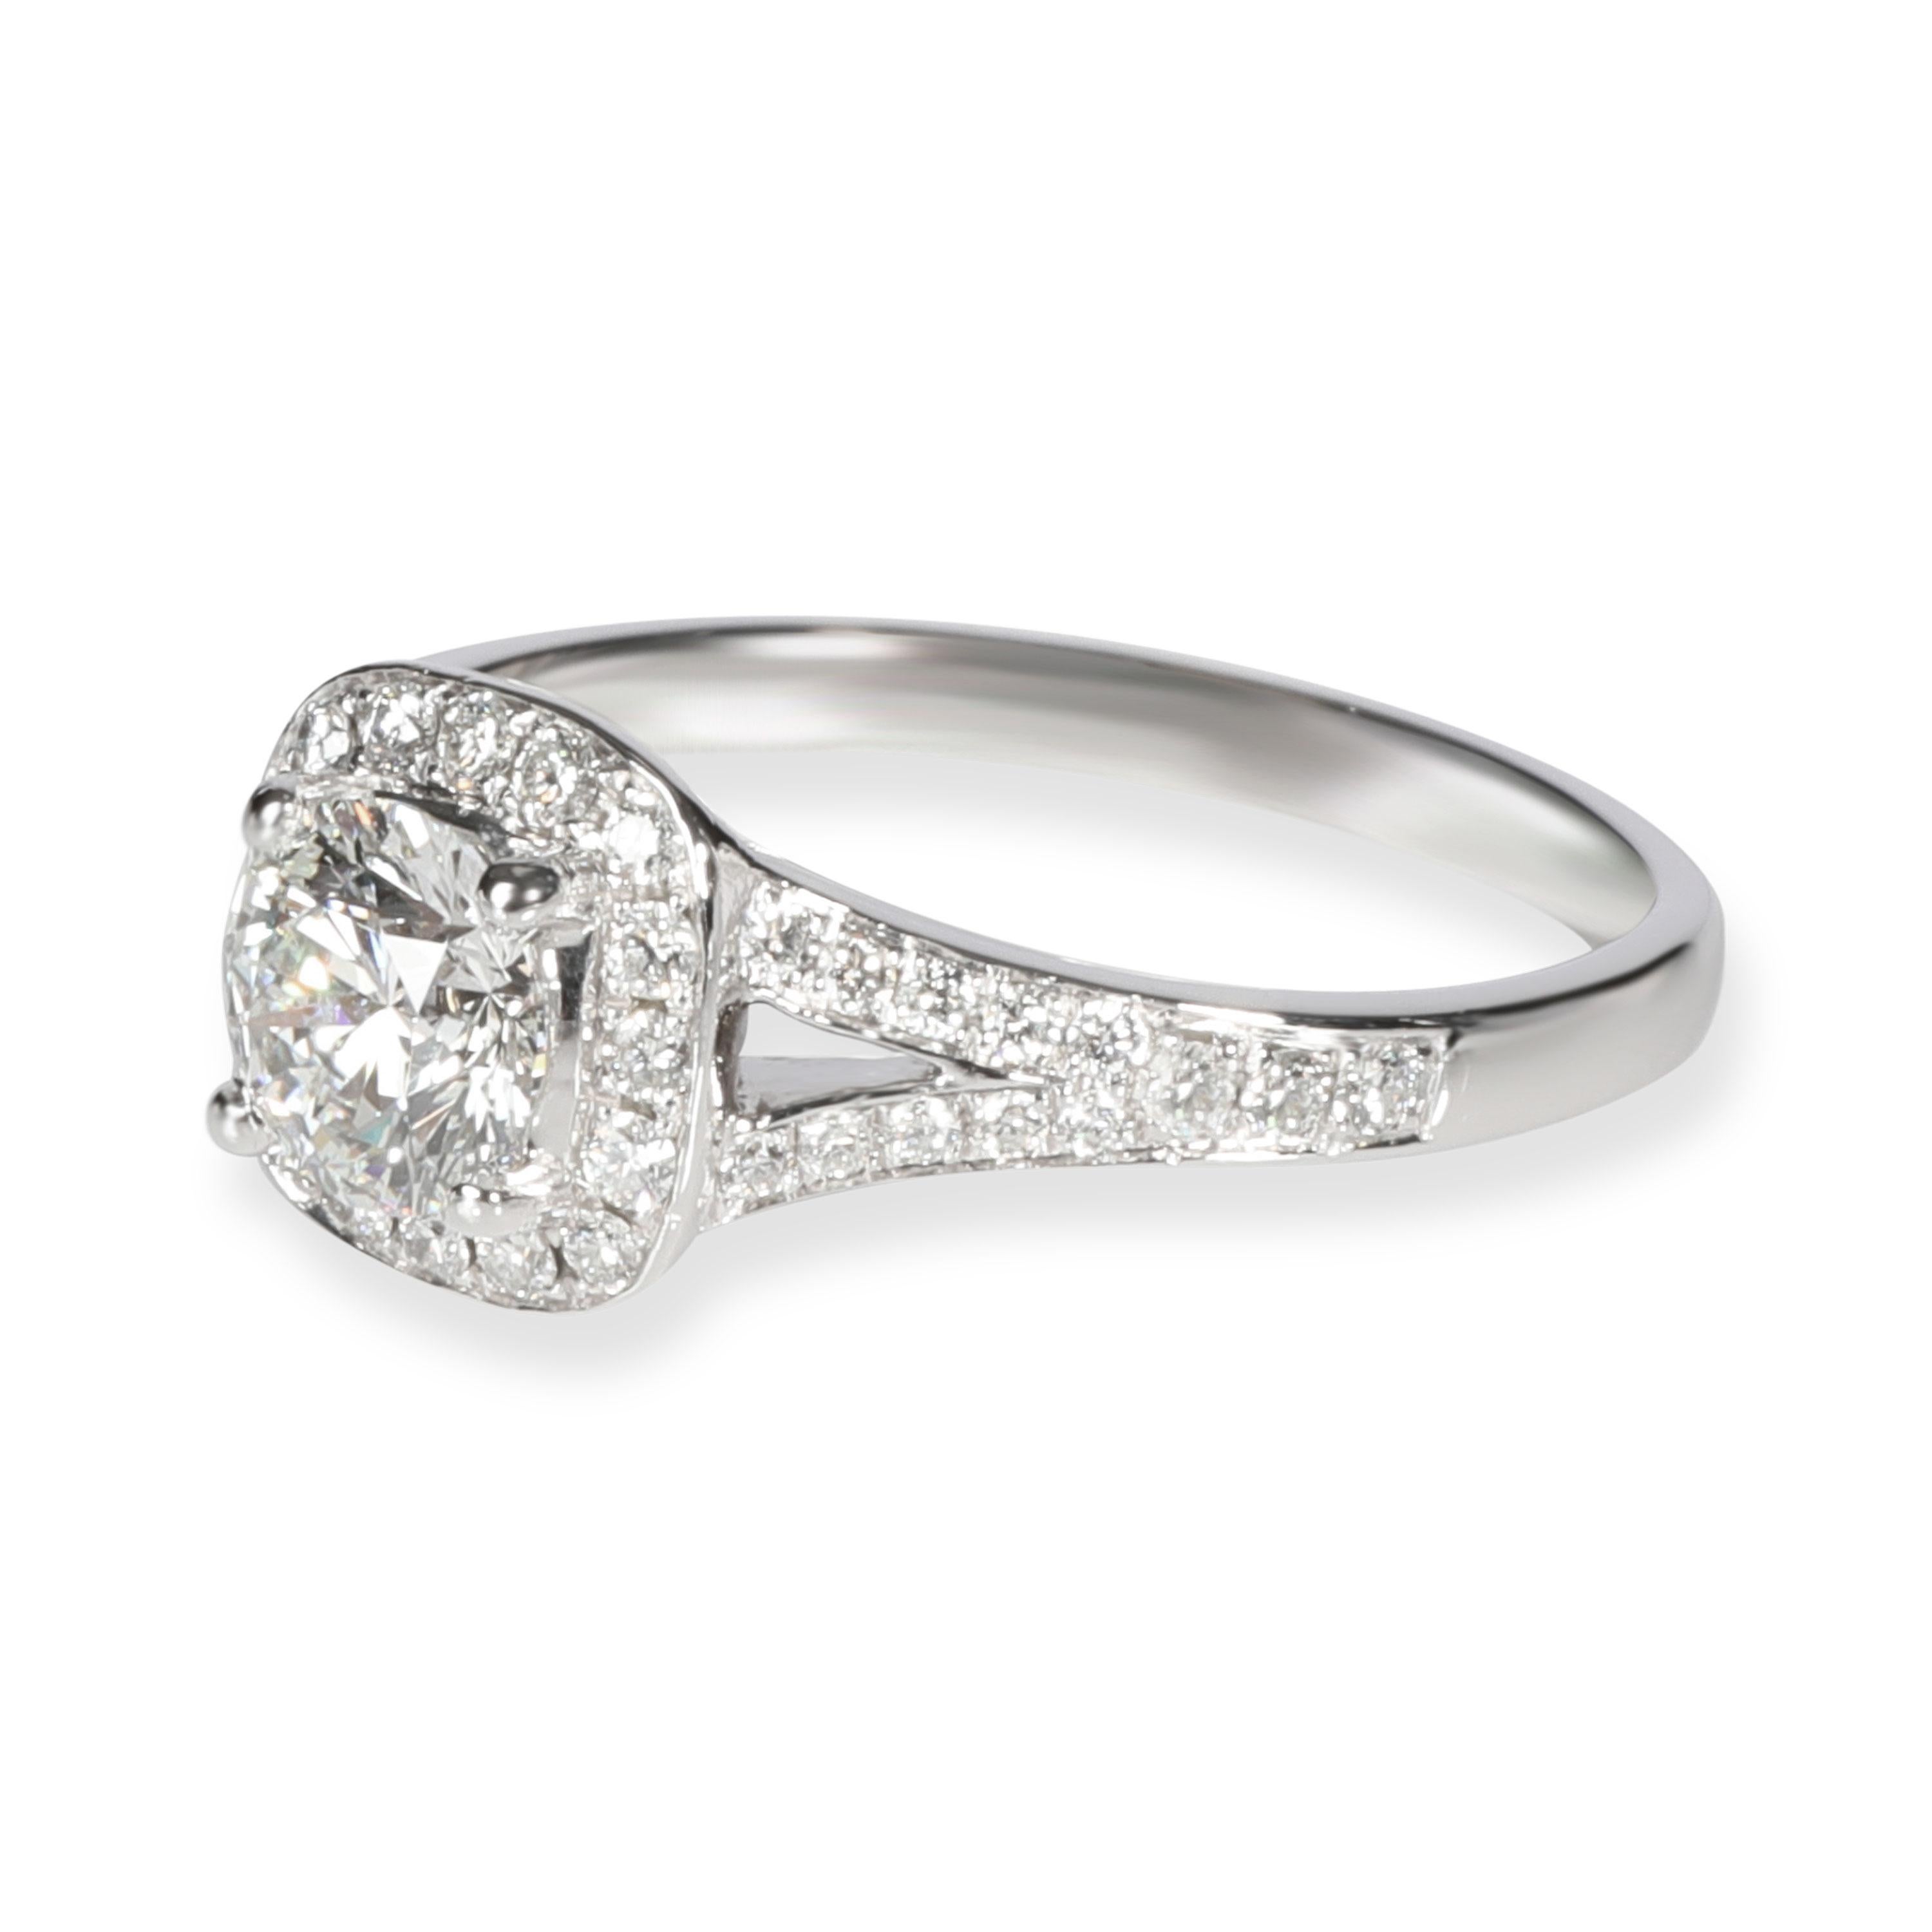 Round Cut GIA Certified Halo Diamond Engagement Ring in Platinum F SI1 1.21 Carat